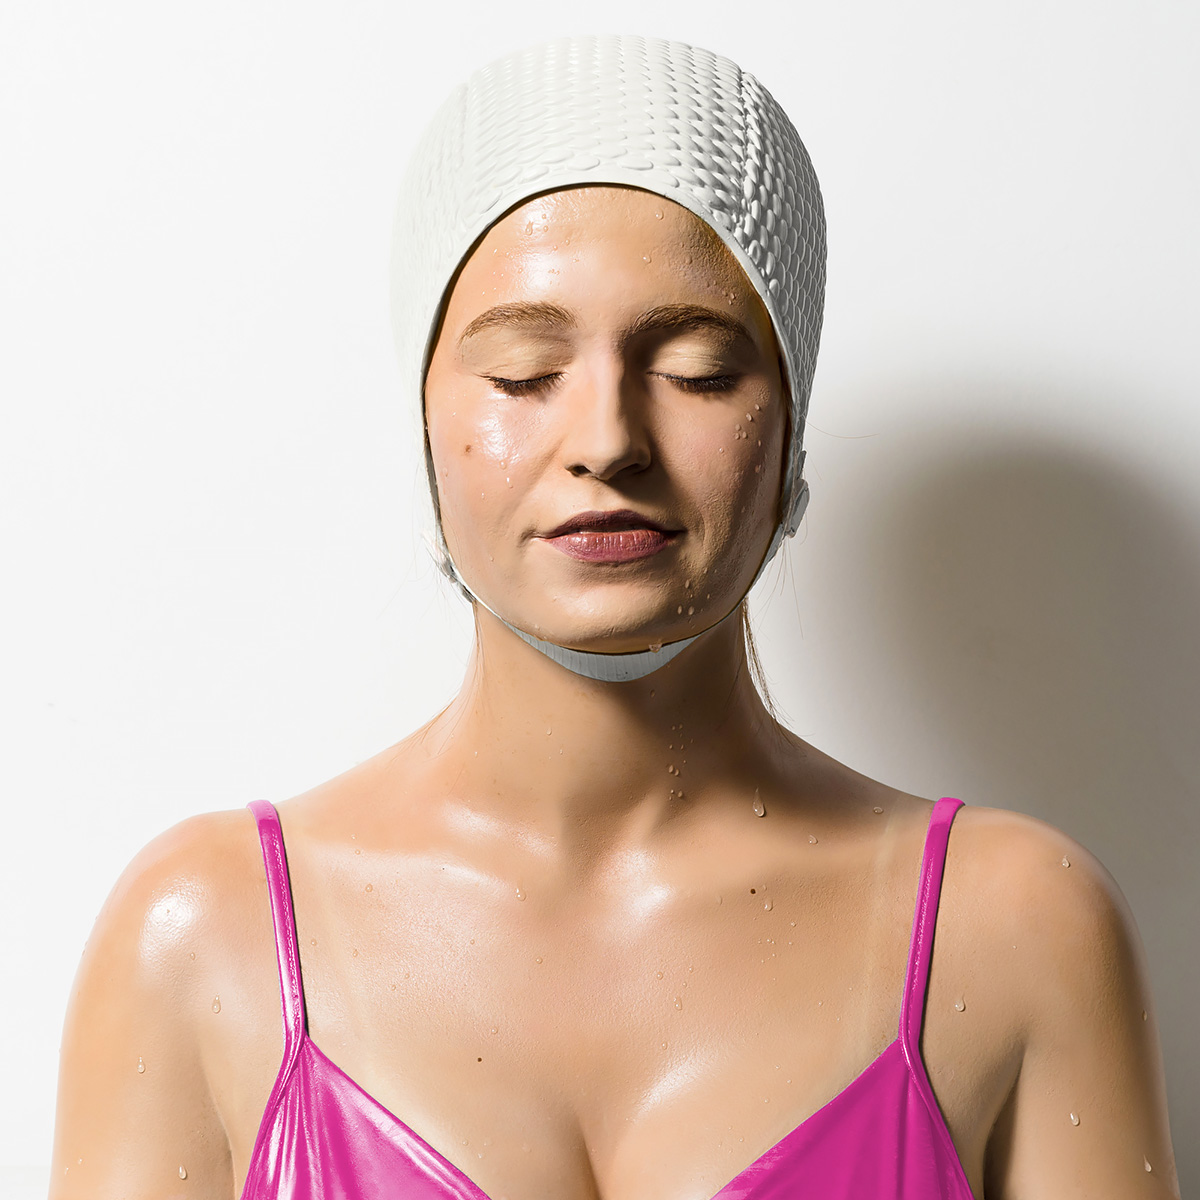 Amazingly Realistic Swimmer Sculptures By Carole A. Feuerman (8)